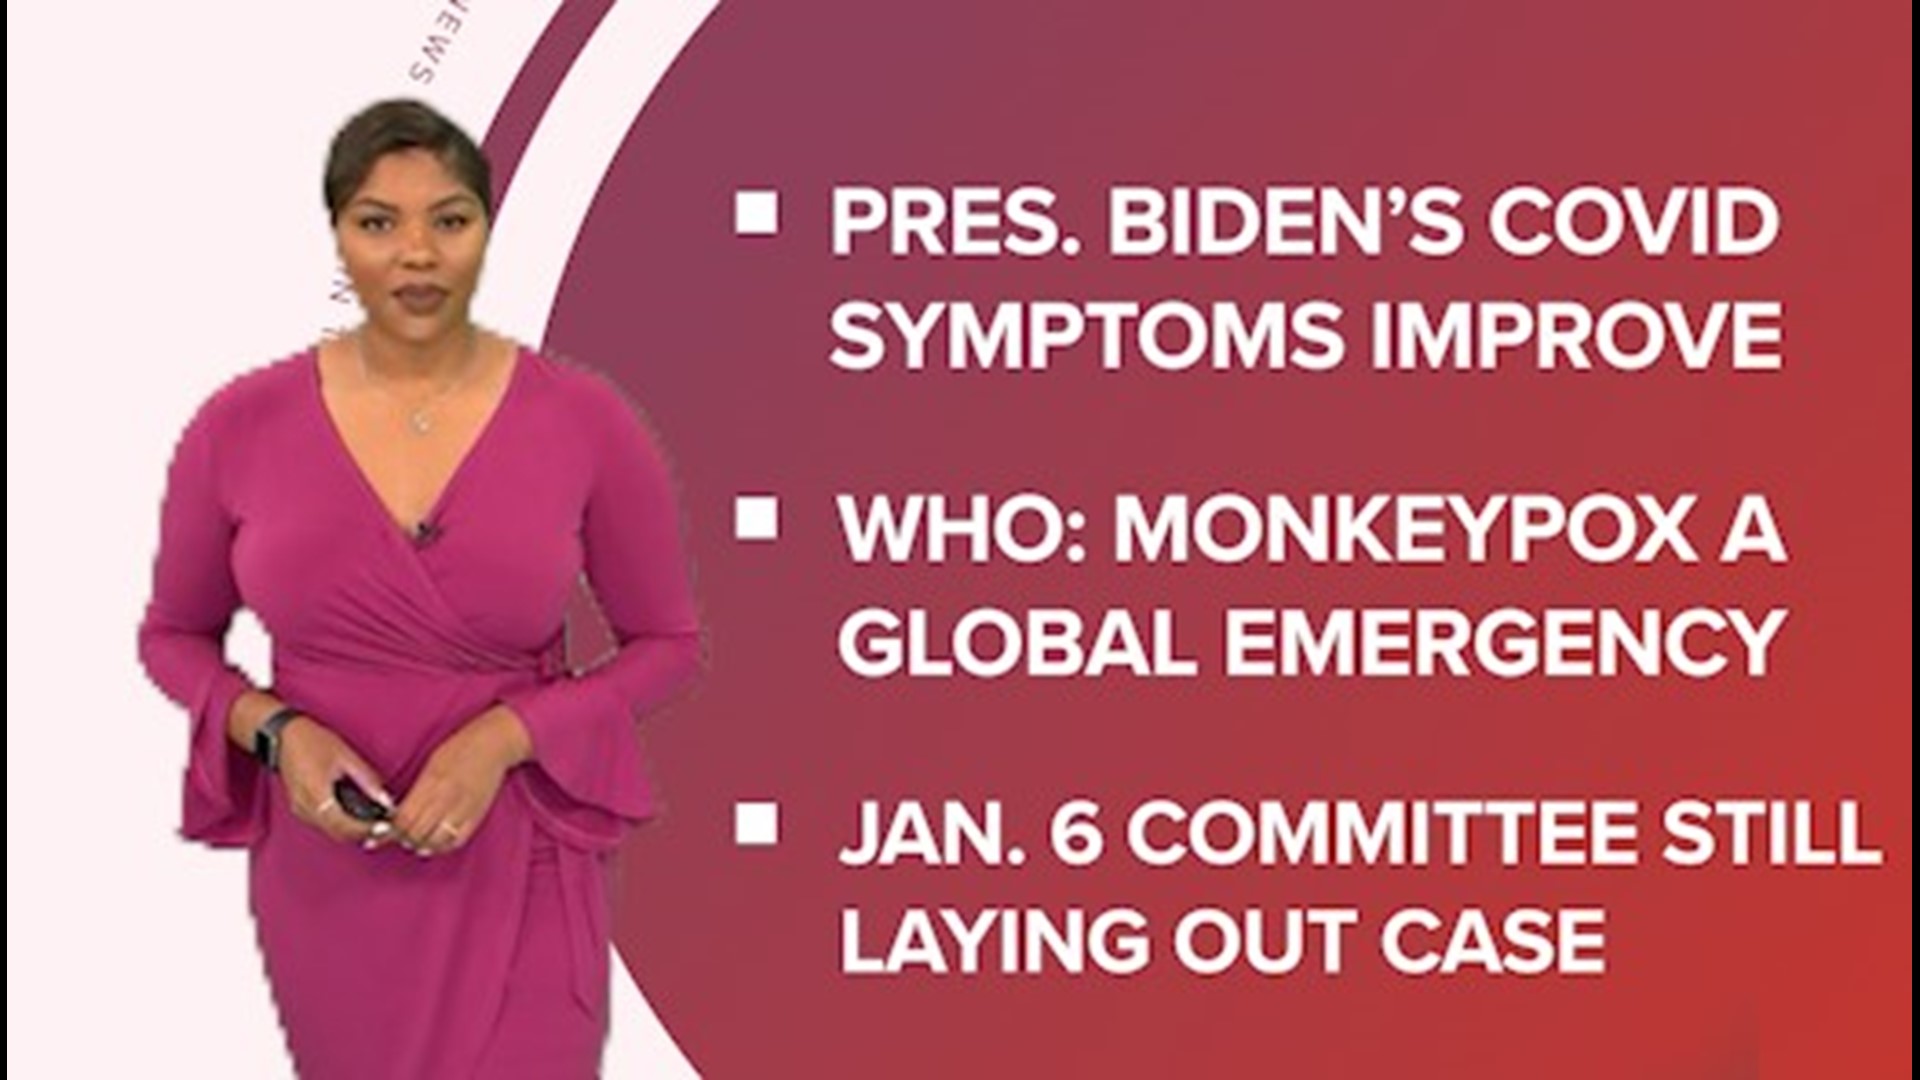 A look at what is happening across the U.S. from Pres. Biden's COVID symptoms improving to a monkeypox global emergency and a new trailer for 'Black Panther 2'